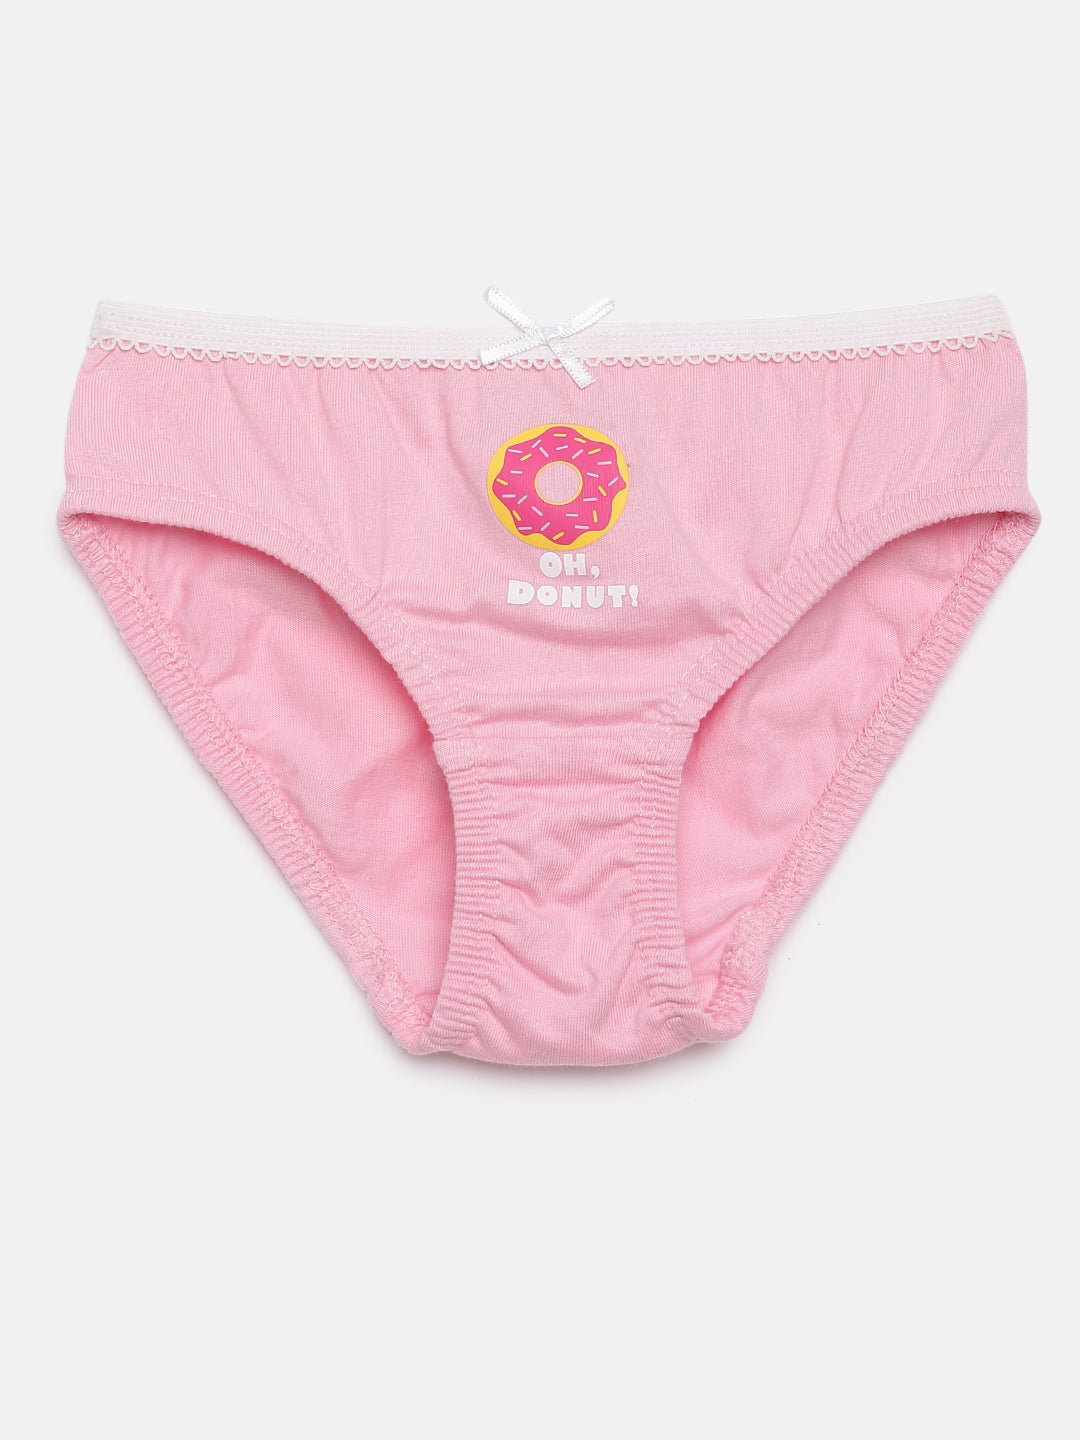 pink Brief for Girls.